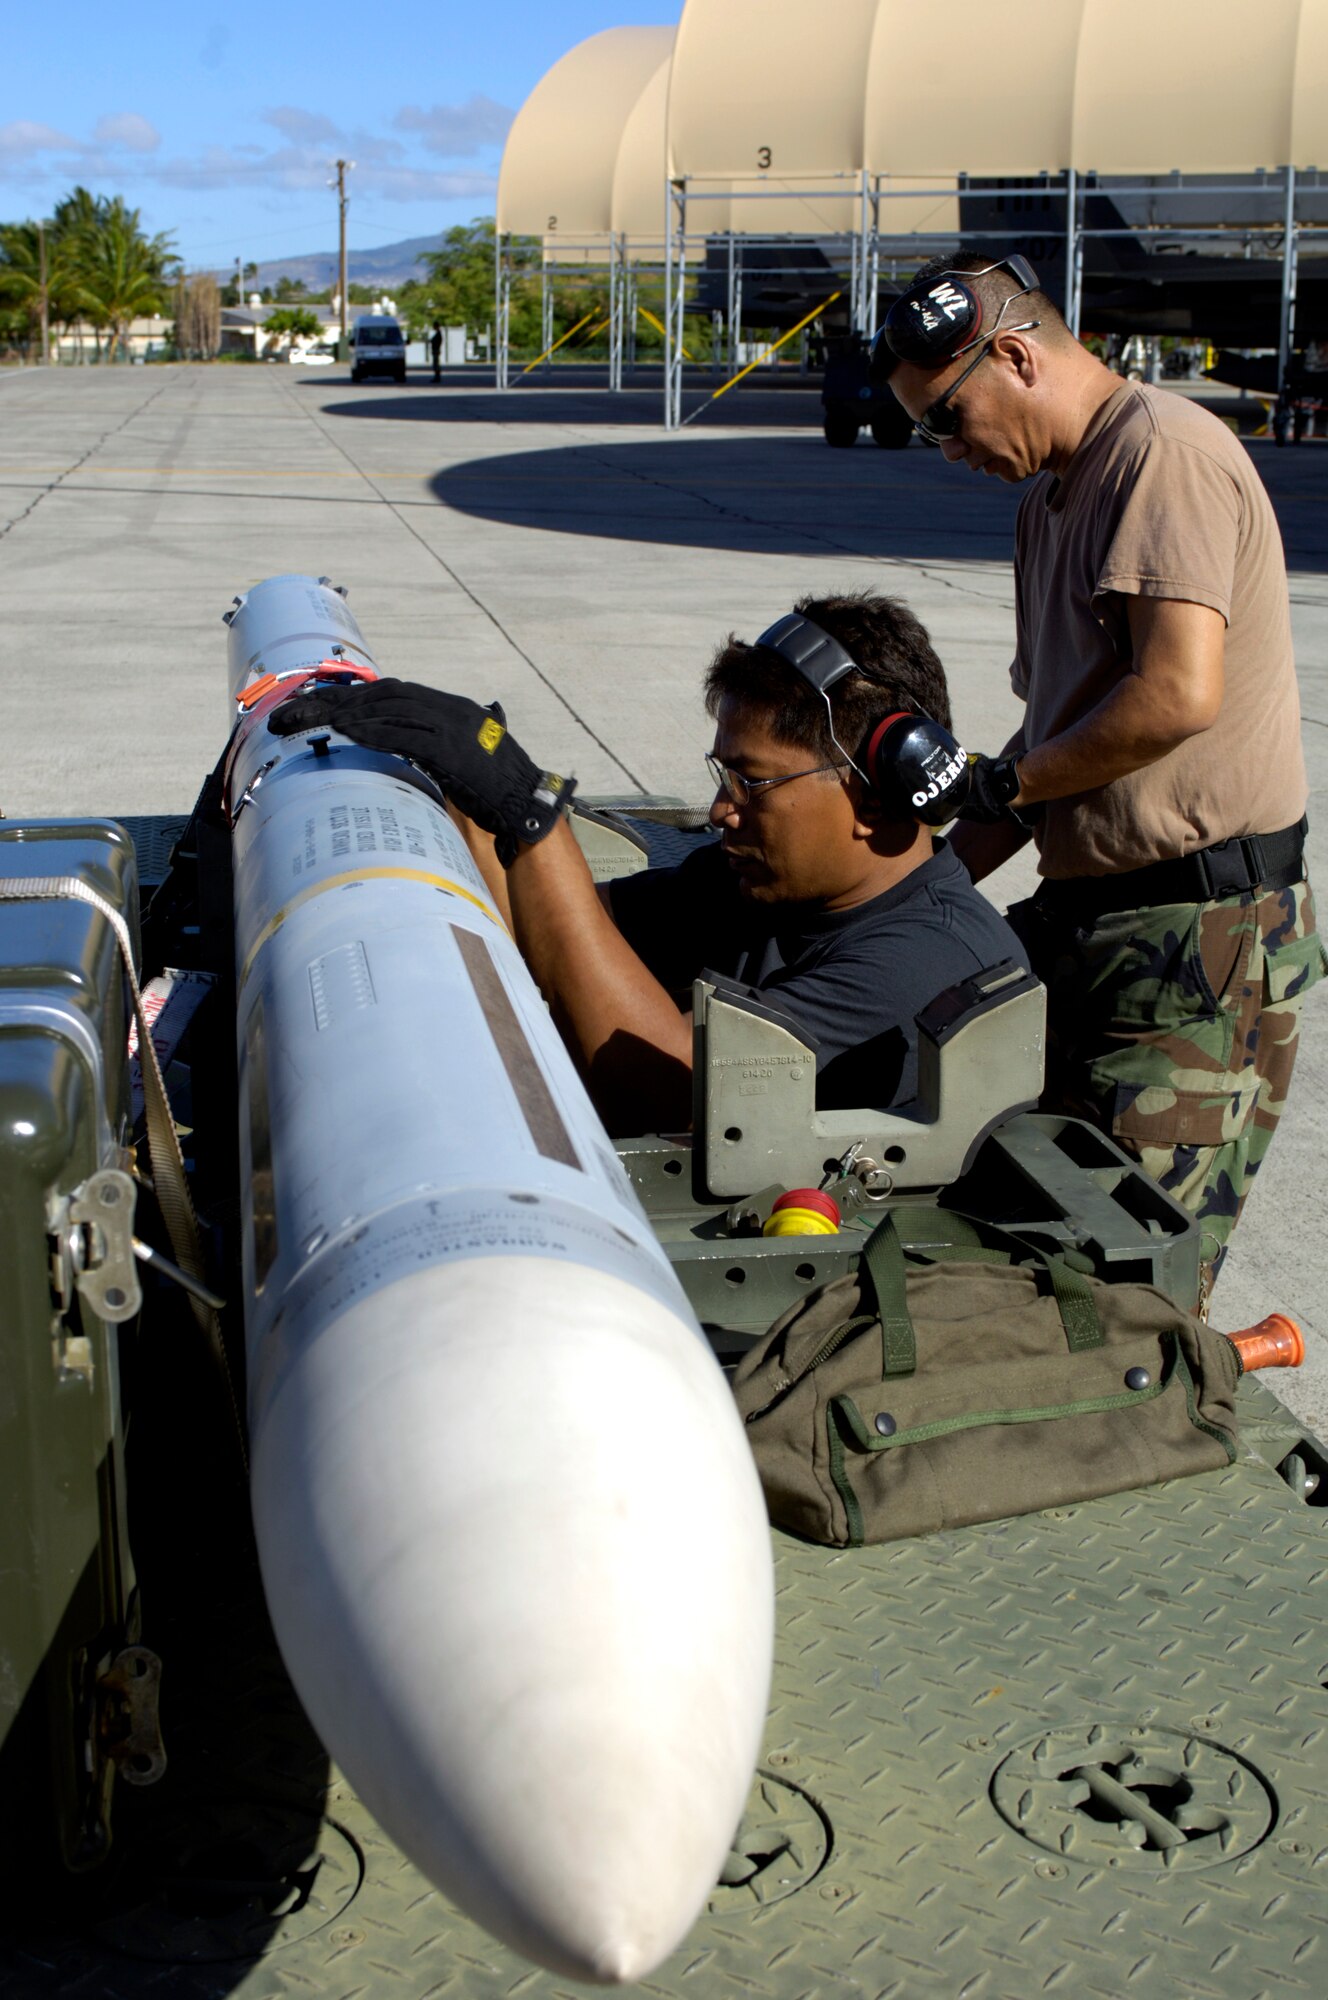 HICKAM AIR FORCE BASE, Hawaii -- Master Sgt. Baldwin Ojerio and Staff Sgt. Arthur Hamabata inspect an AIM-7 Sparrow missile before loading it on an F-15 Eagle at Hickam Air Force Base Hawaii July 16, 2006 during Rim of the Pacific Exercise 2006. The Airmen are from the Hawaii Air National Guard 154th Aircraft Maintenance Squadron. The Eagles will be firing 14 live missiles at two decoy targets during RIMPAC. RIMPAC 2006 brings friendly forces from the Pacific theater and the United Kingdom together to engage in air and sea war games. (U.S. Air Force photo/ Tech. Sgt. Shane A. Cuomo)